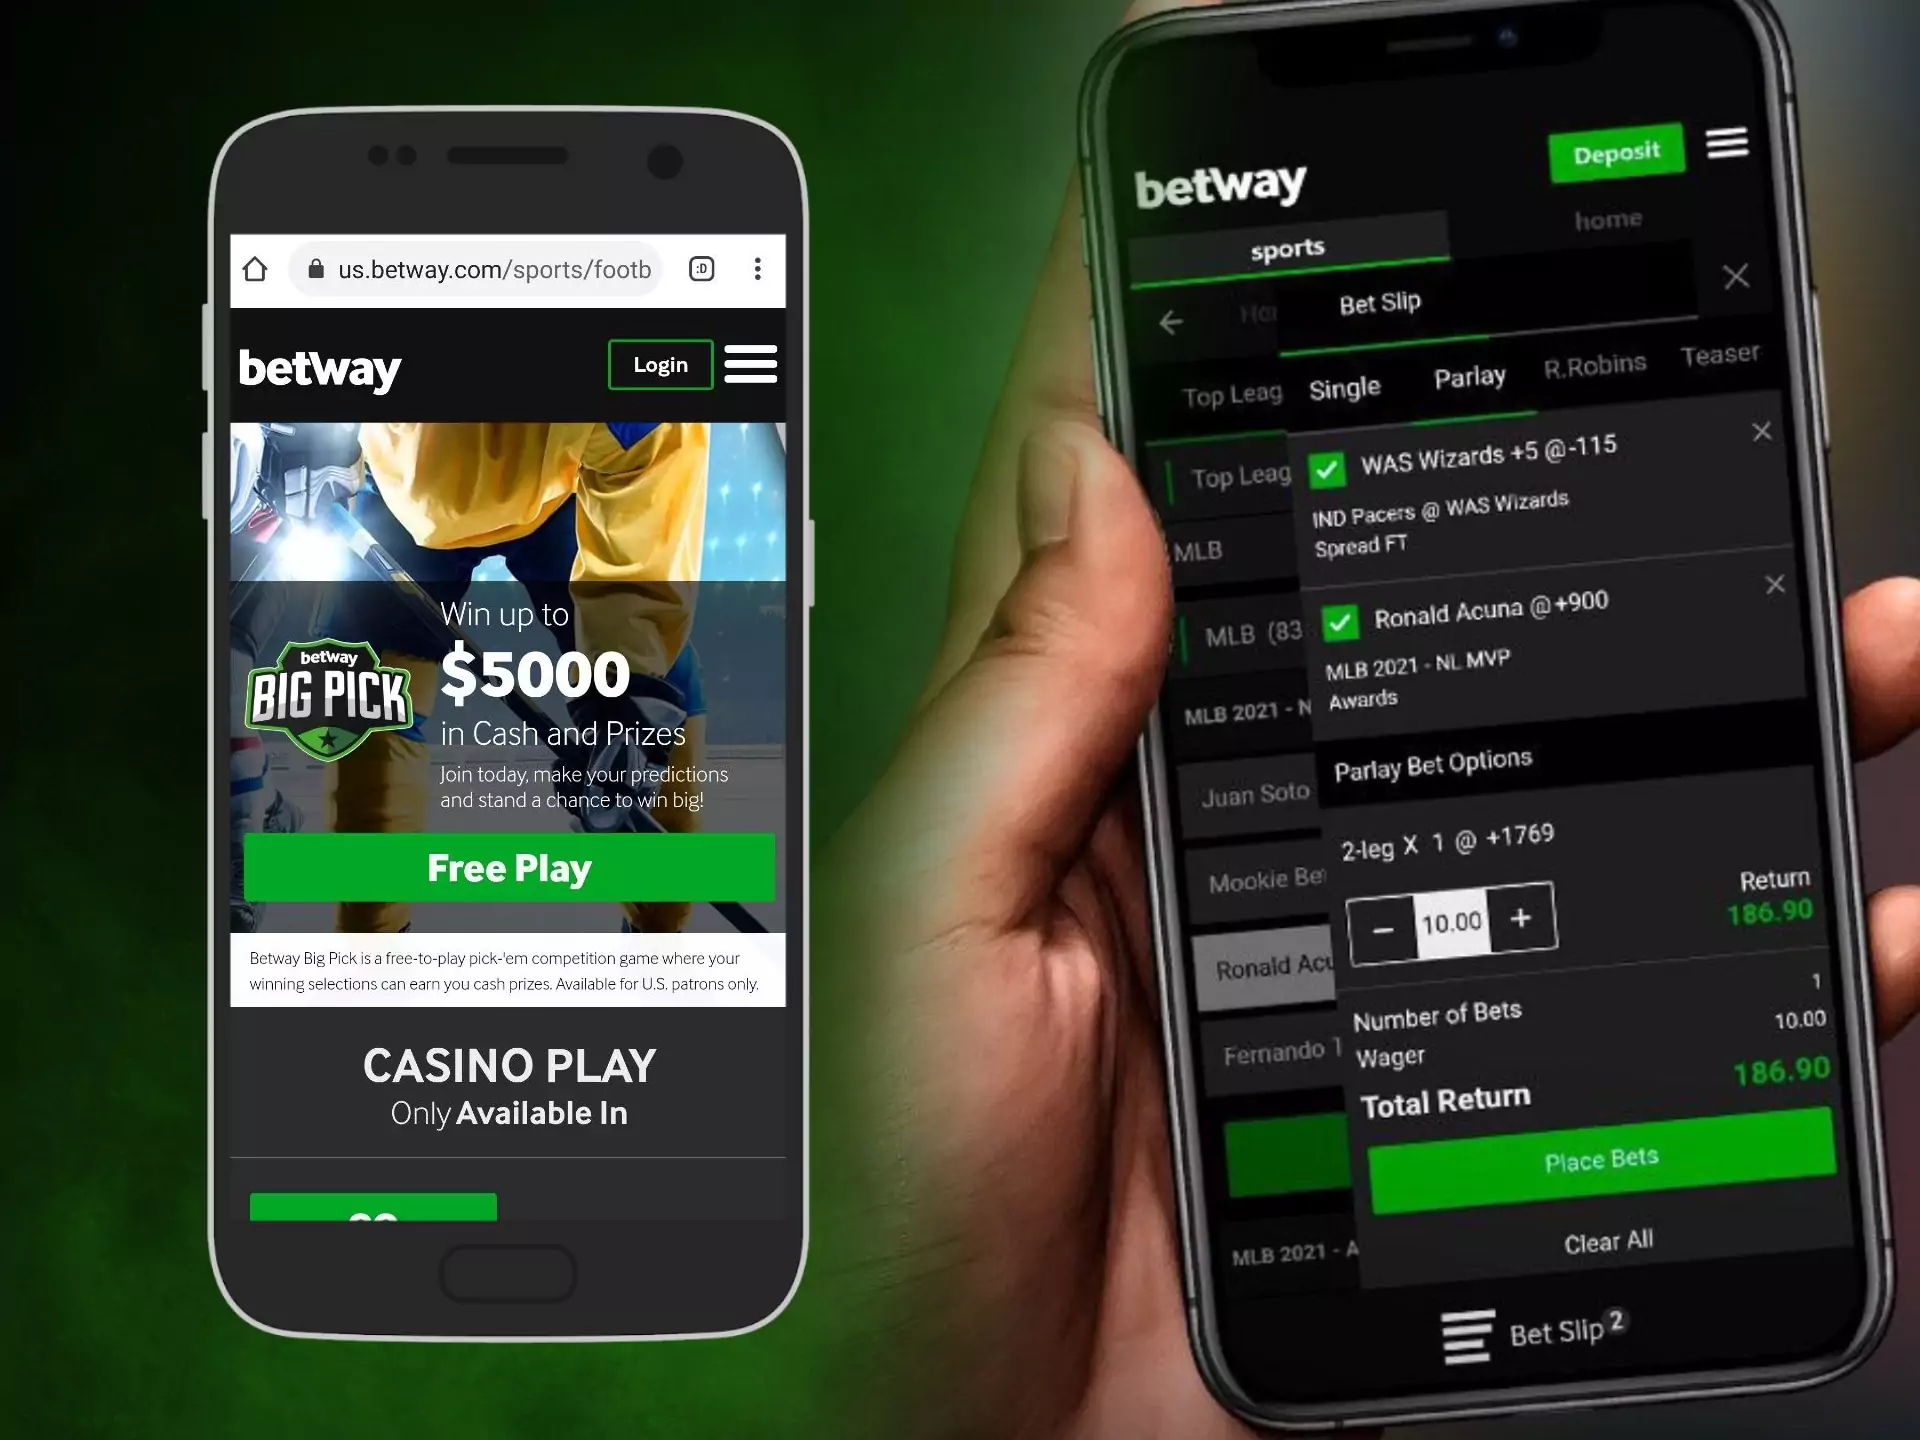 What Do You Want 24 Betting App To Become?